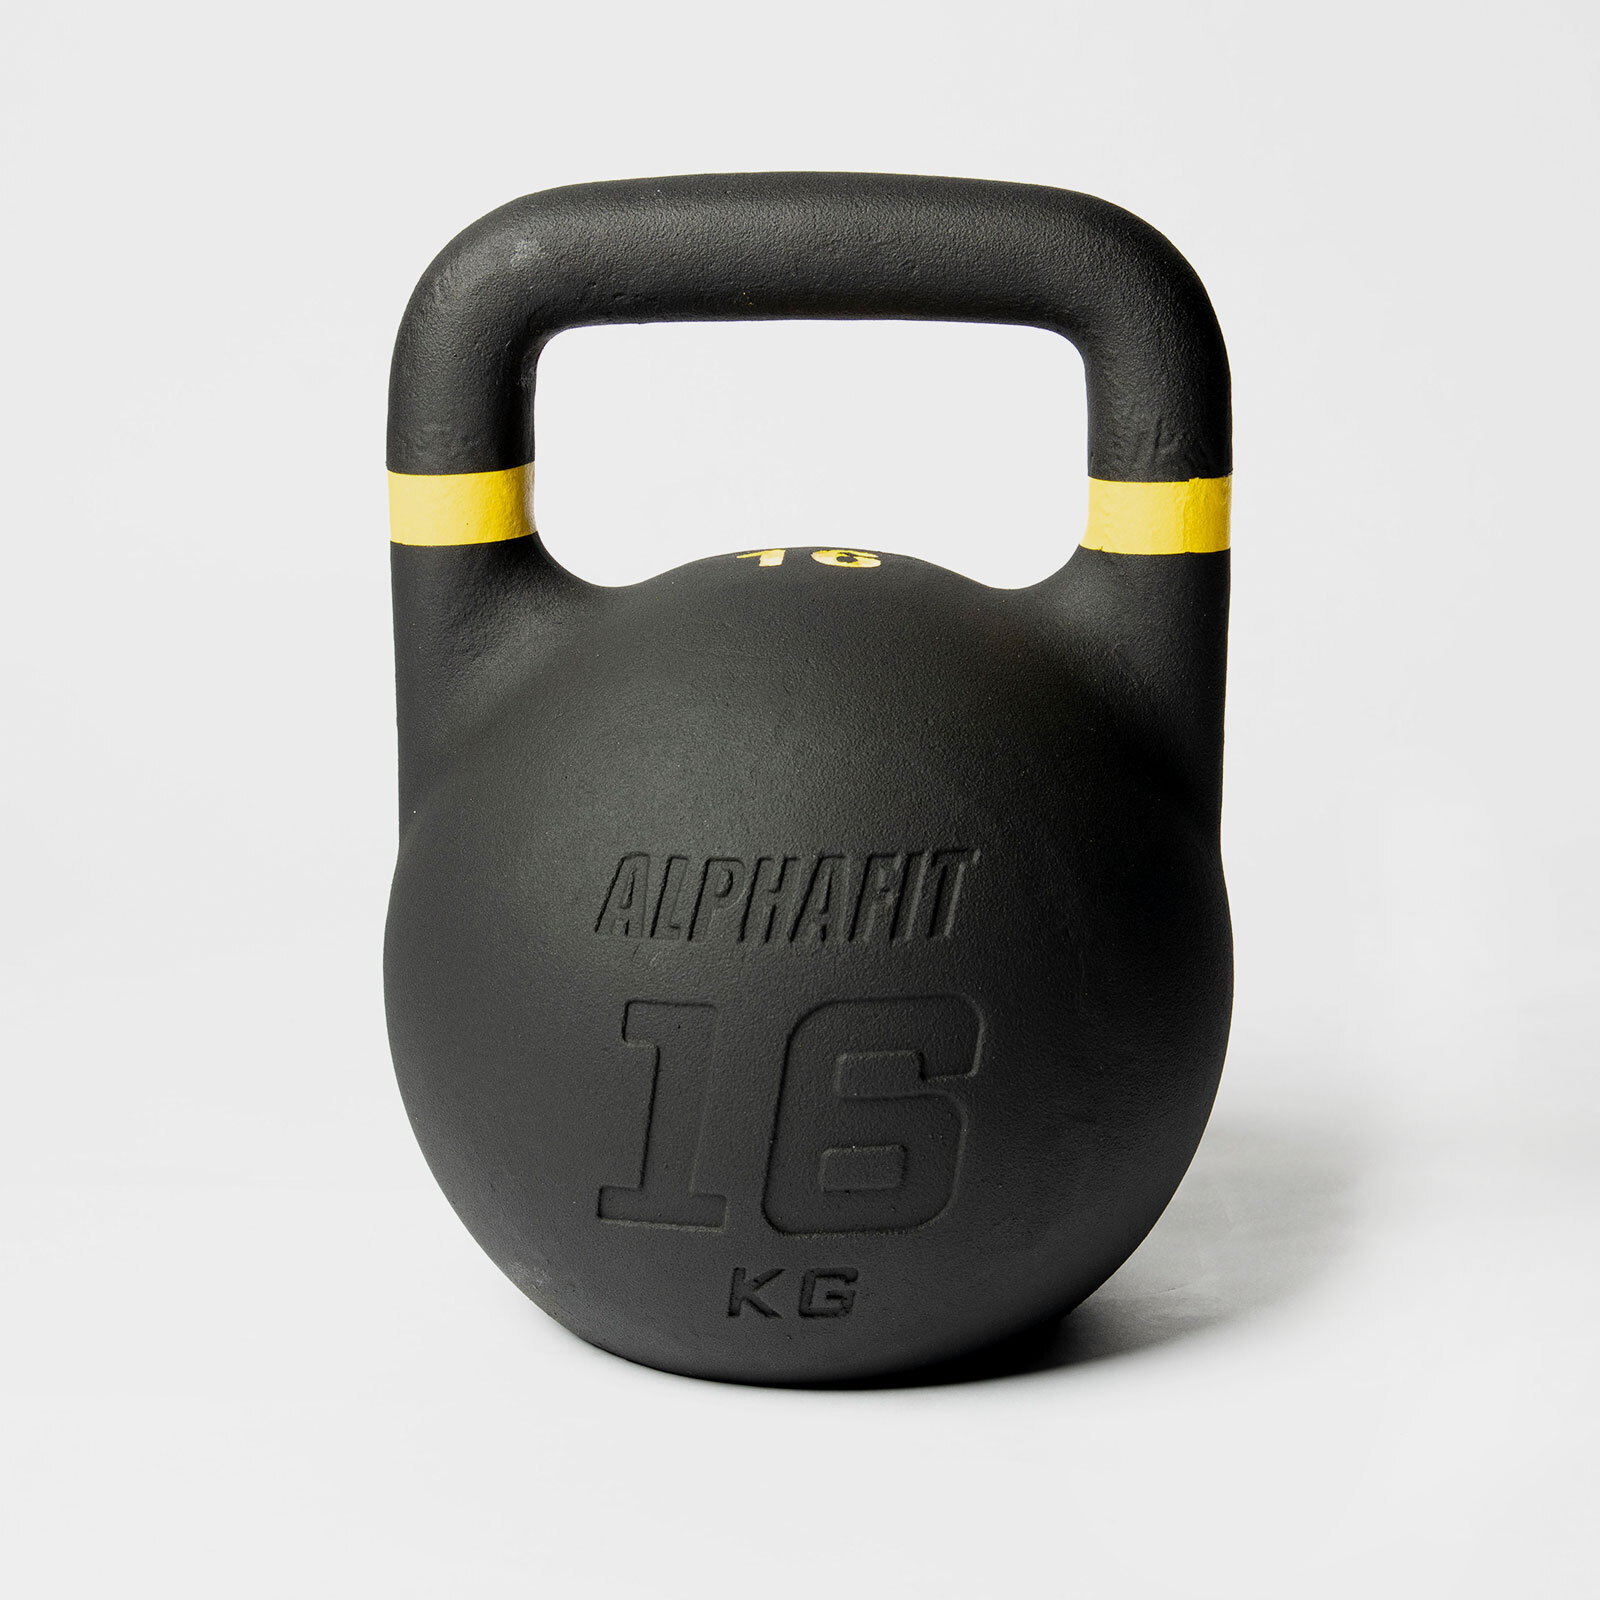 Ex-Comp Competition Kettlebells image